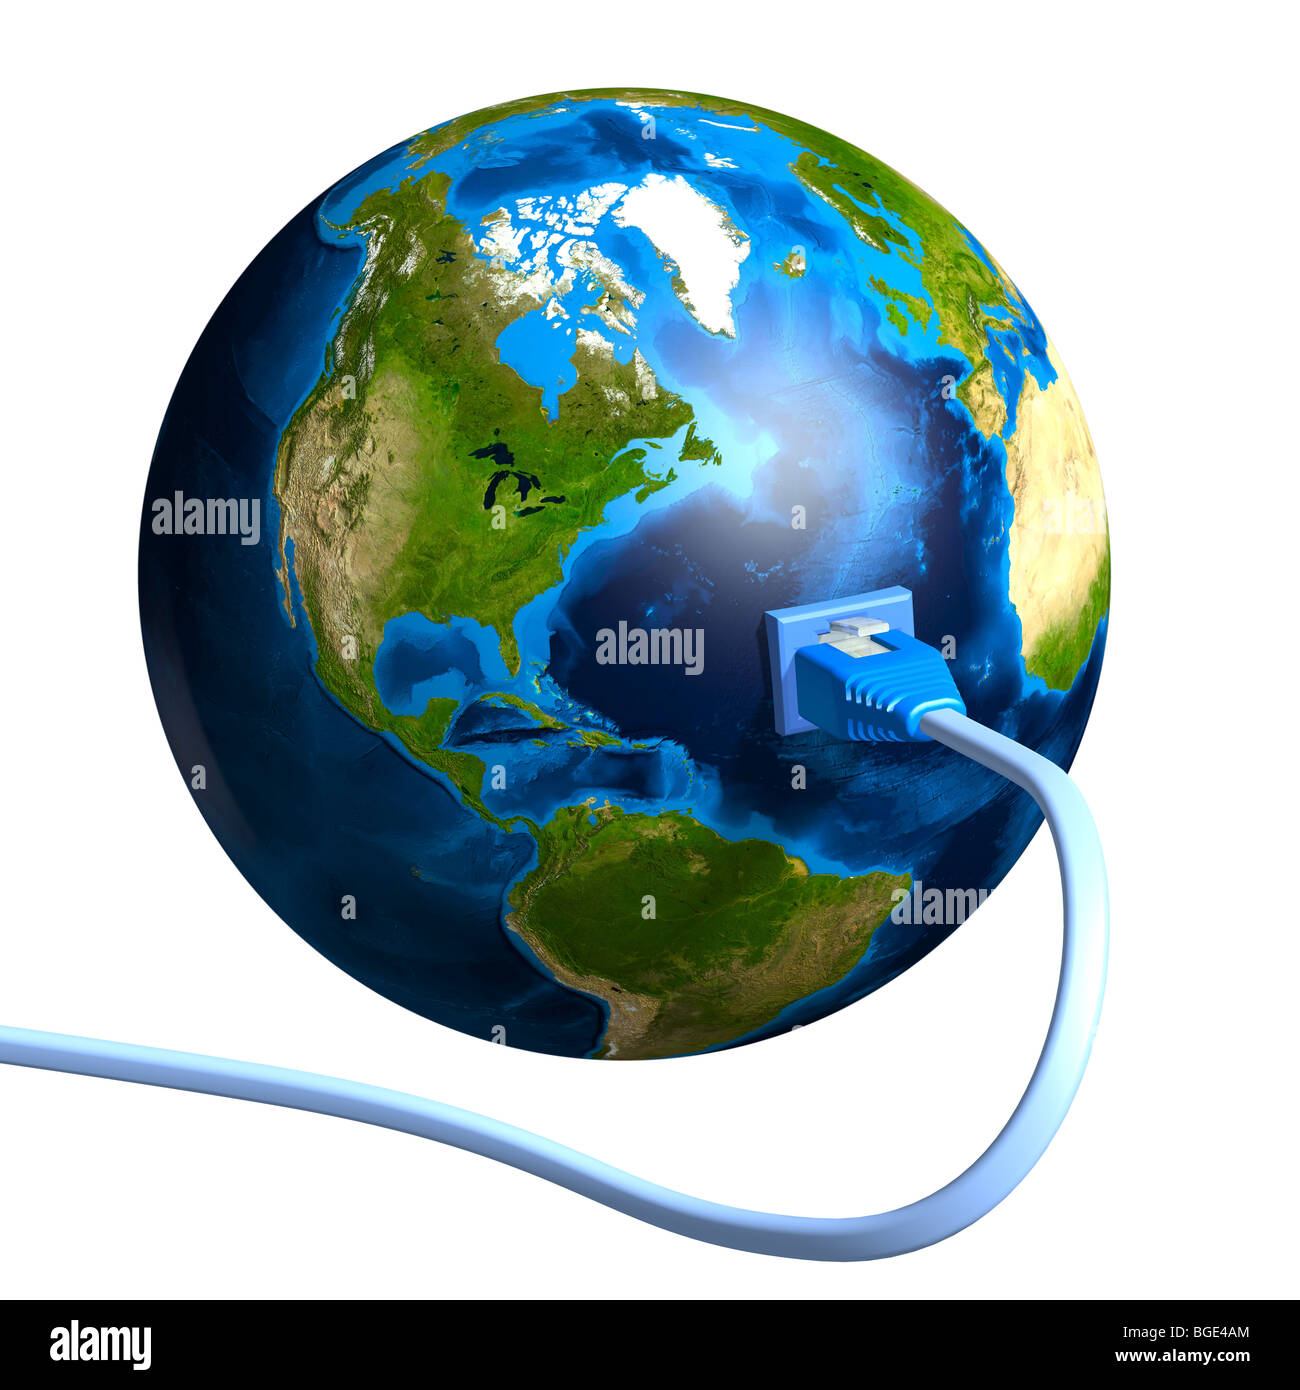 Network cable plugged into the Earth globe. Conceptual 3D illustration. Stock Photo